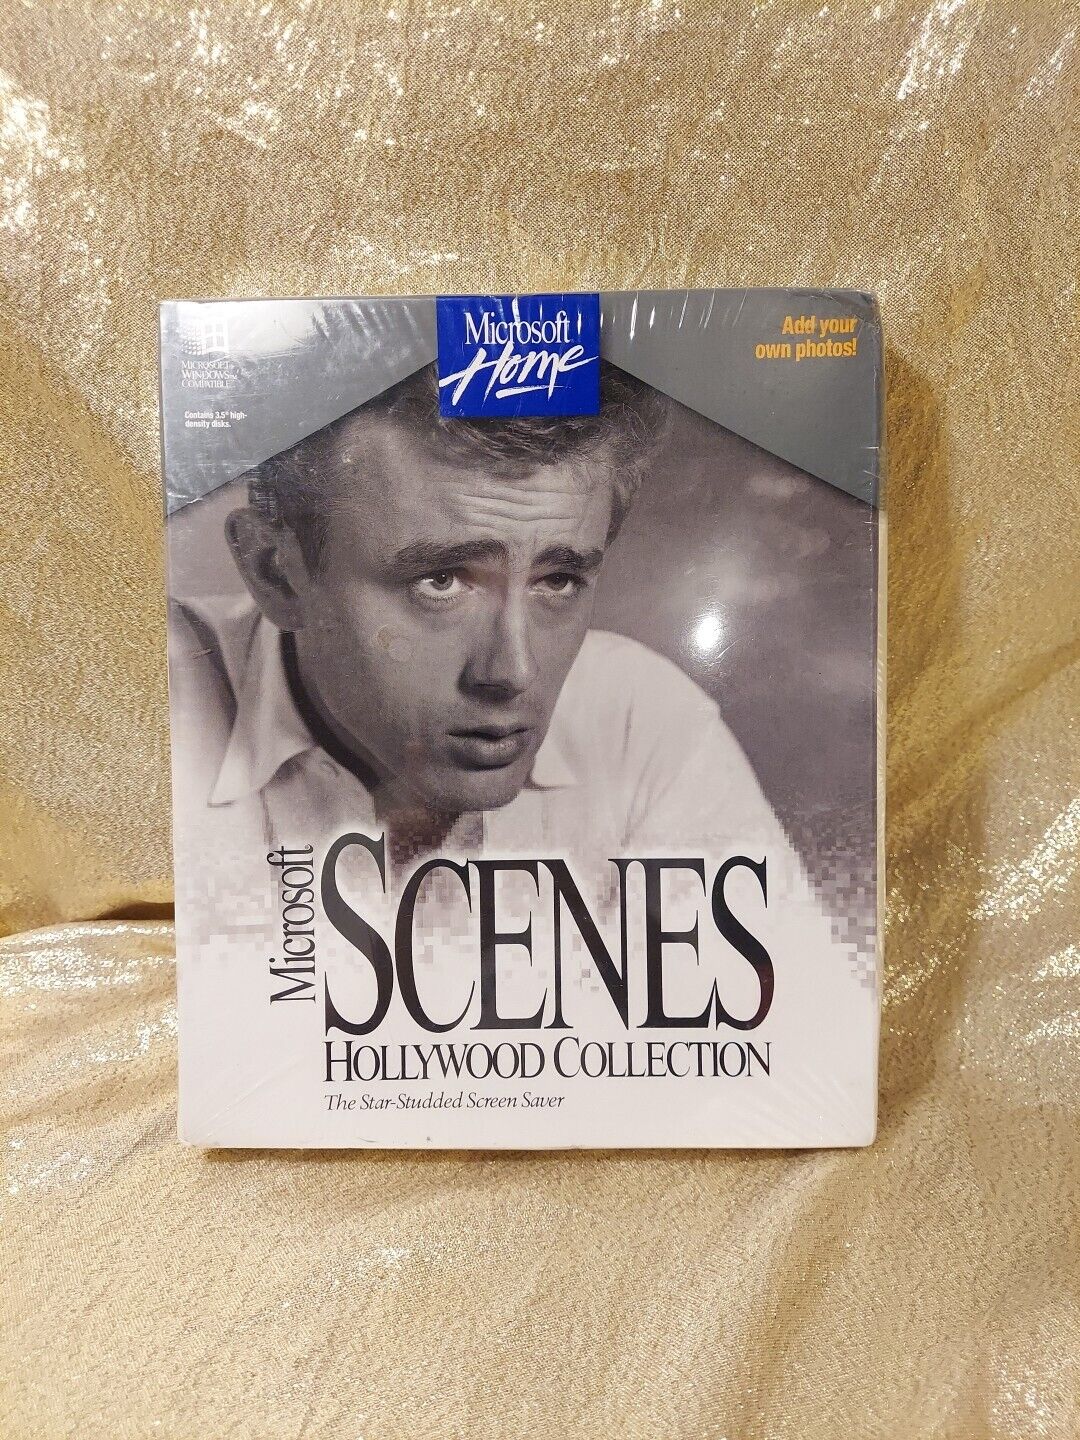 Microsoft Scenes Hollywood Collection Screen Saver Vintage Rare New NOS 1994